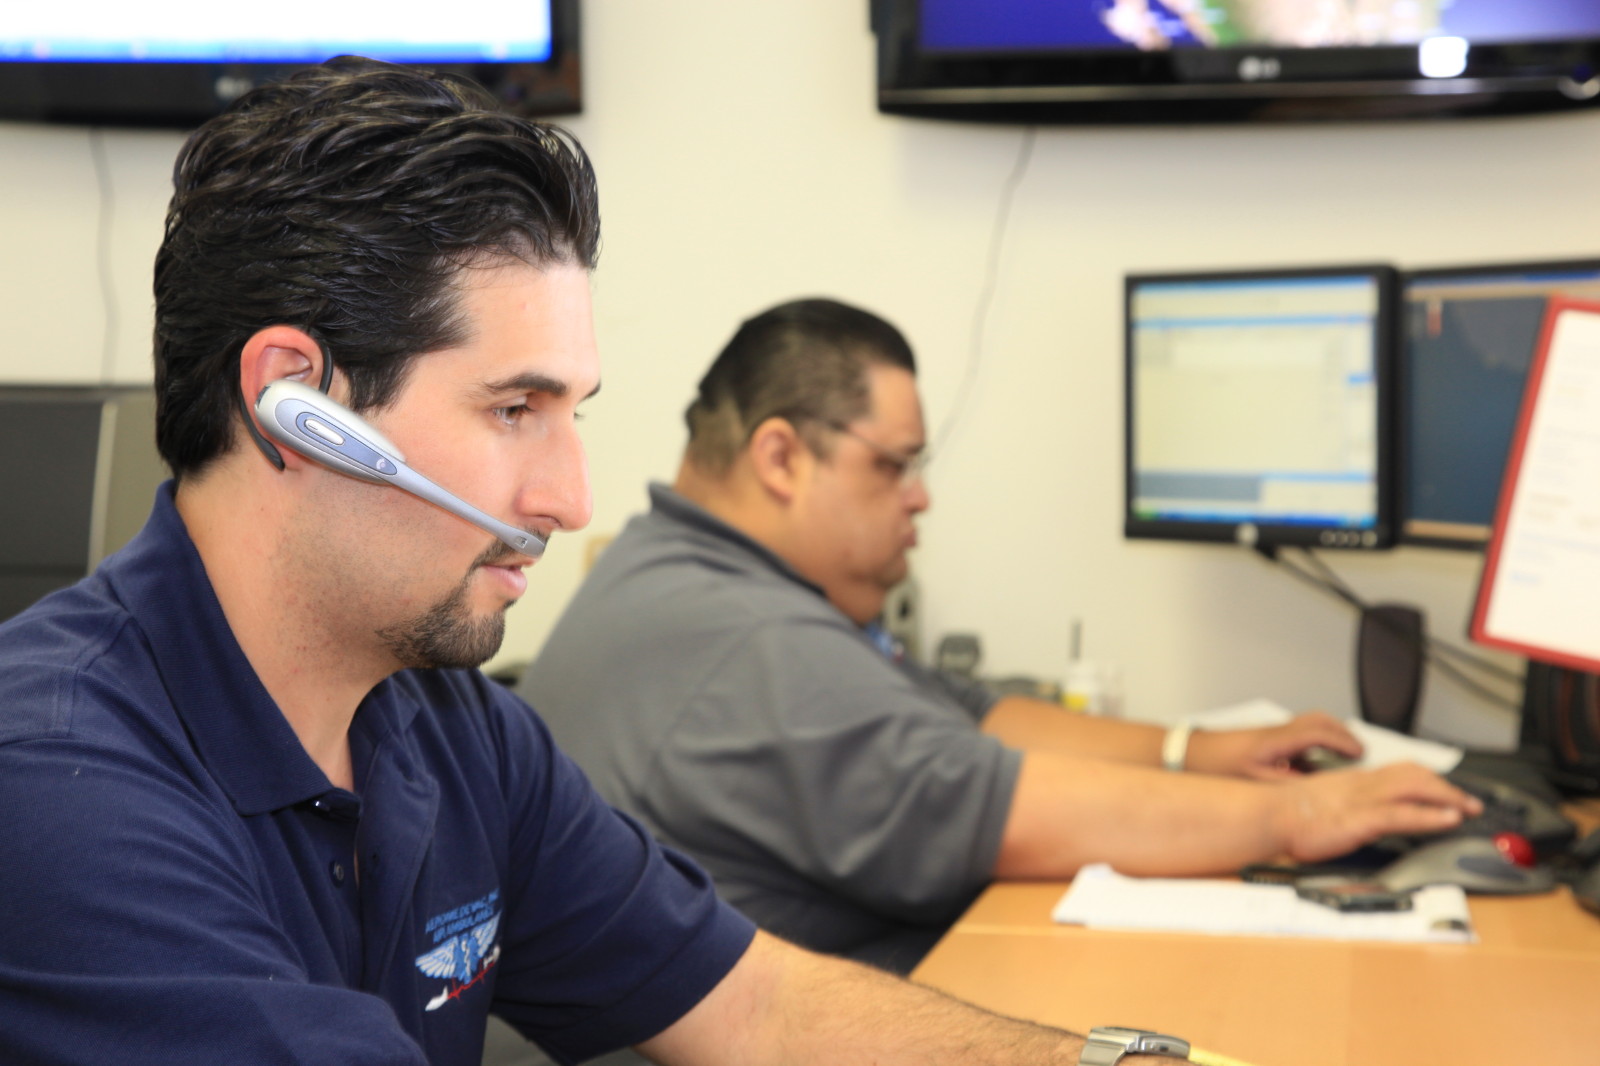 Aeromedevac Communications team members working together to ensure patient requests are handled properly and all insurance details are handled for a proper medical flight